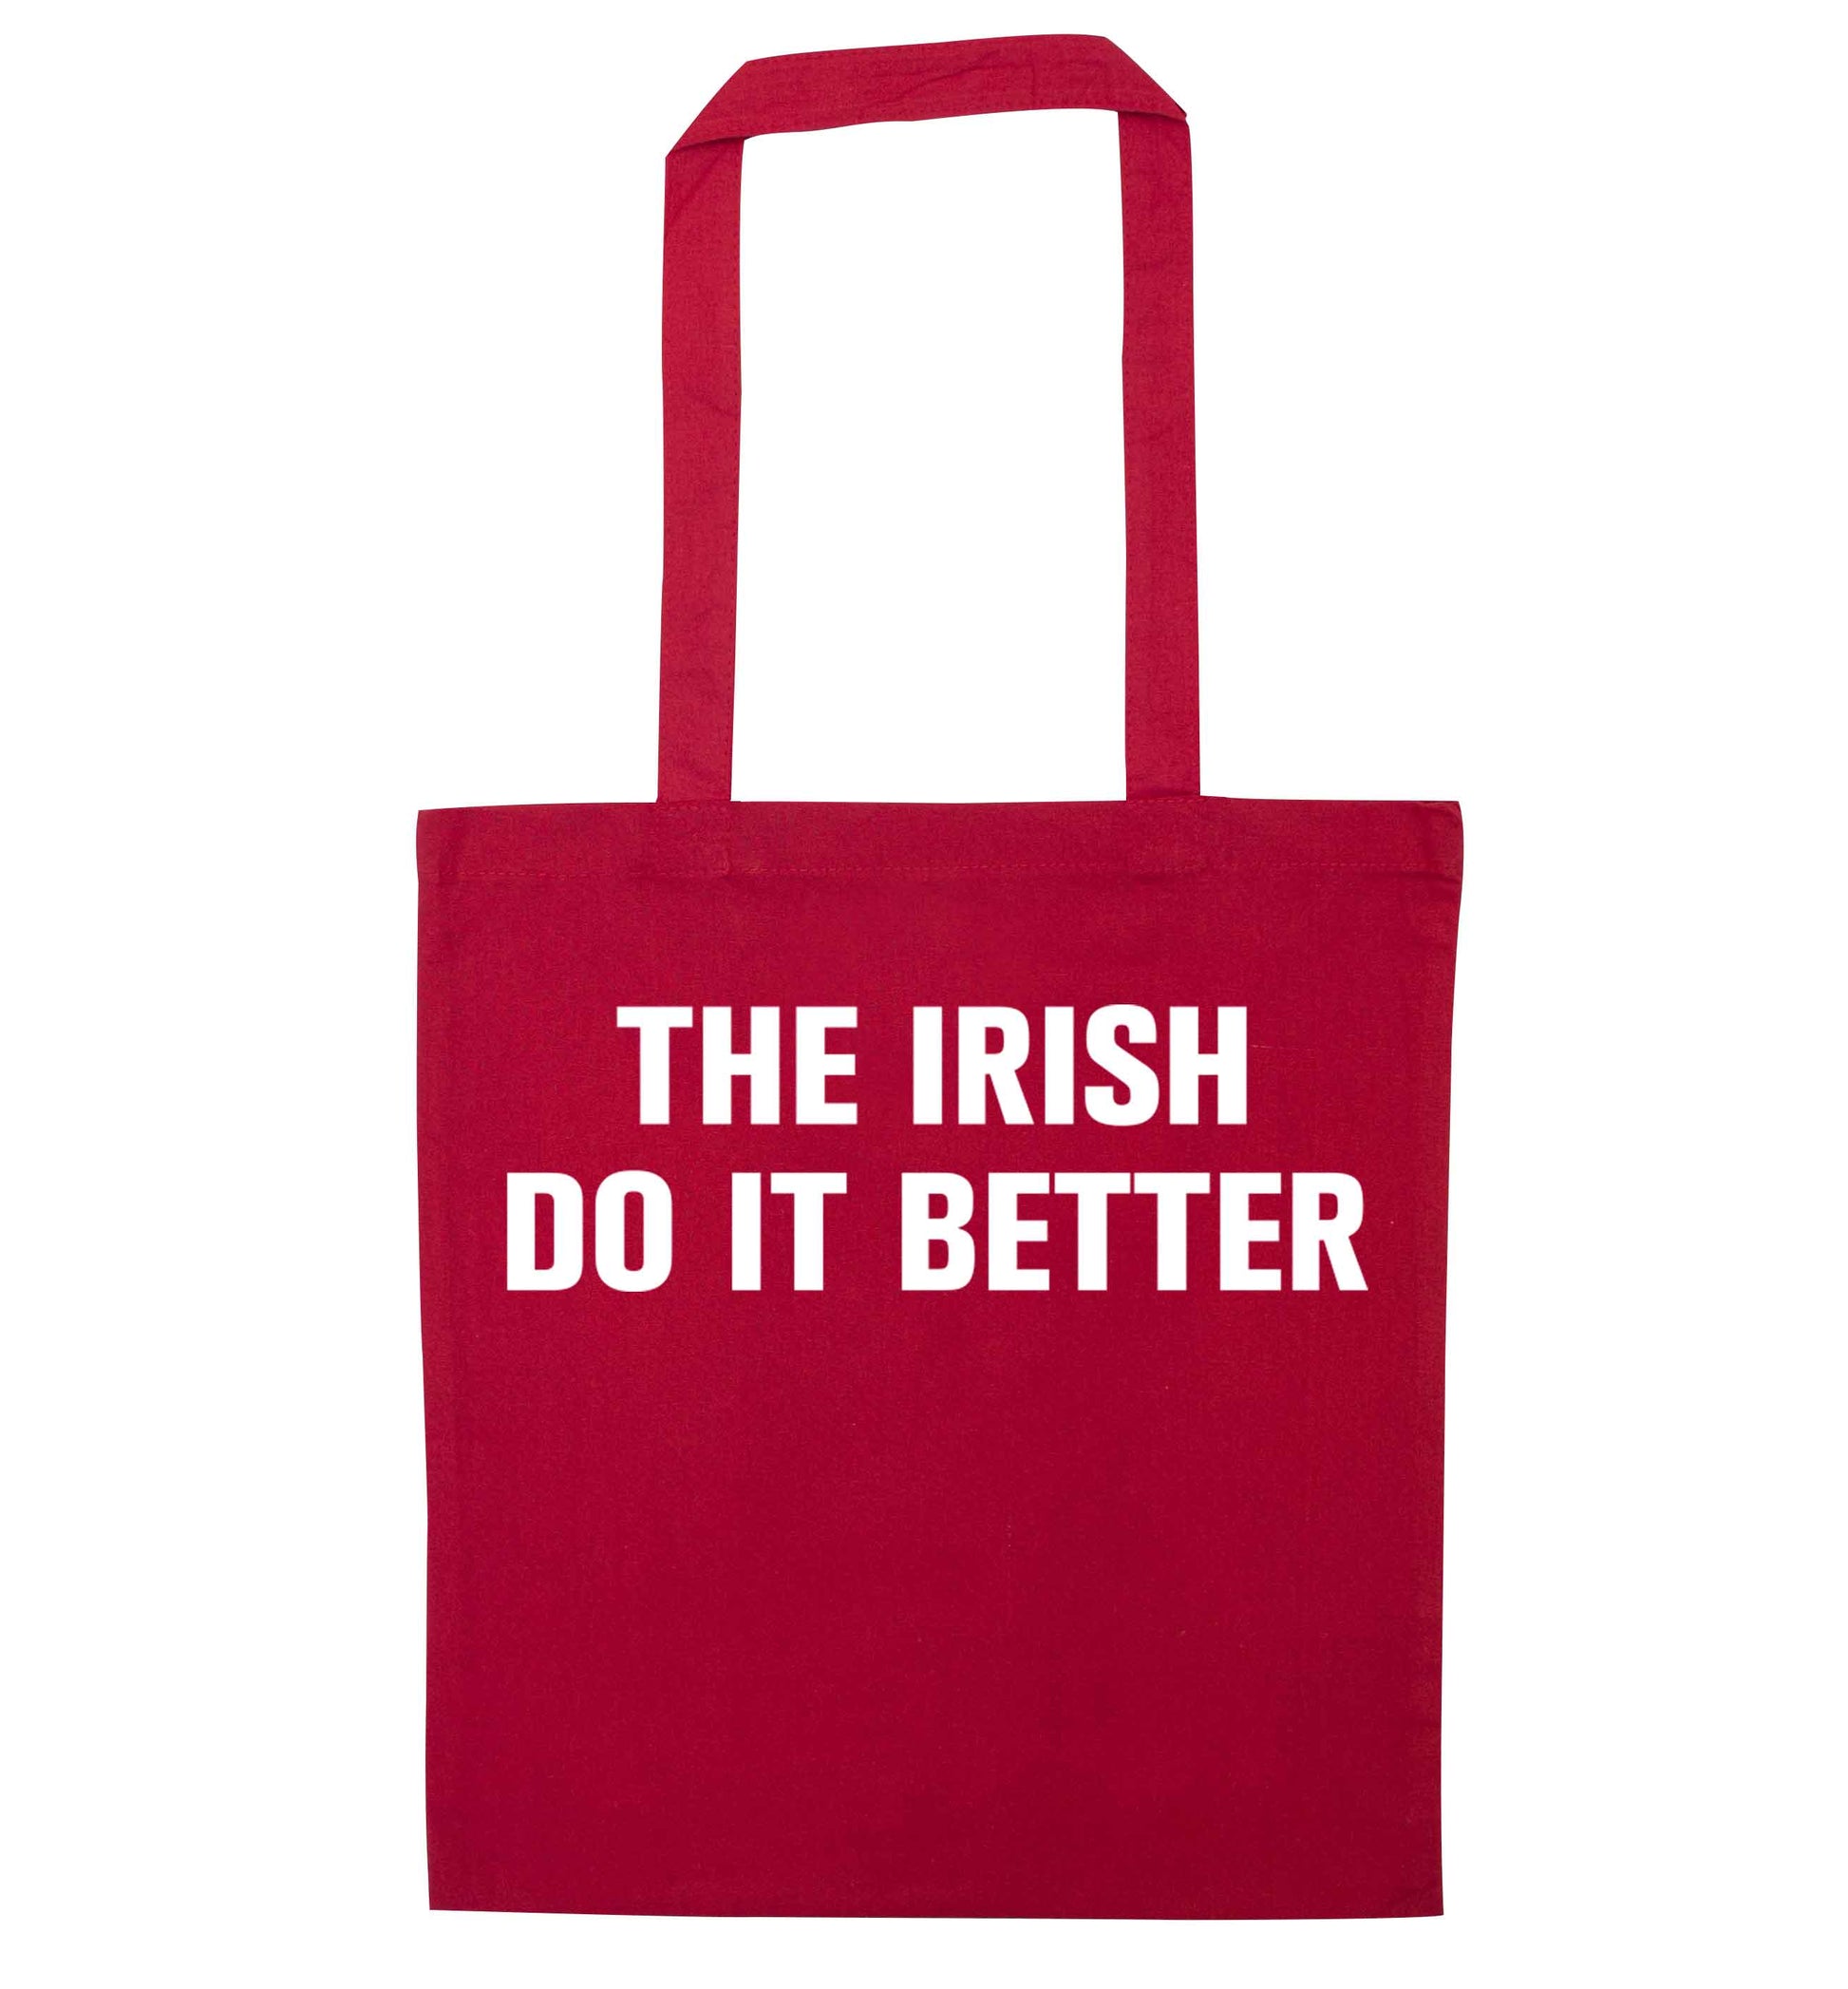 The Irish do it better red tote bag